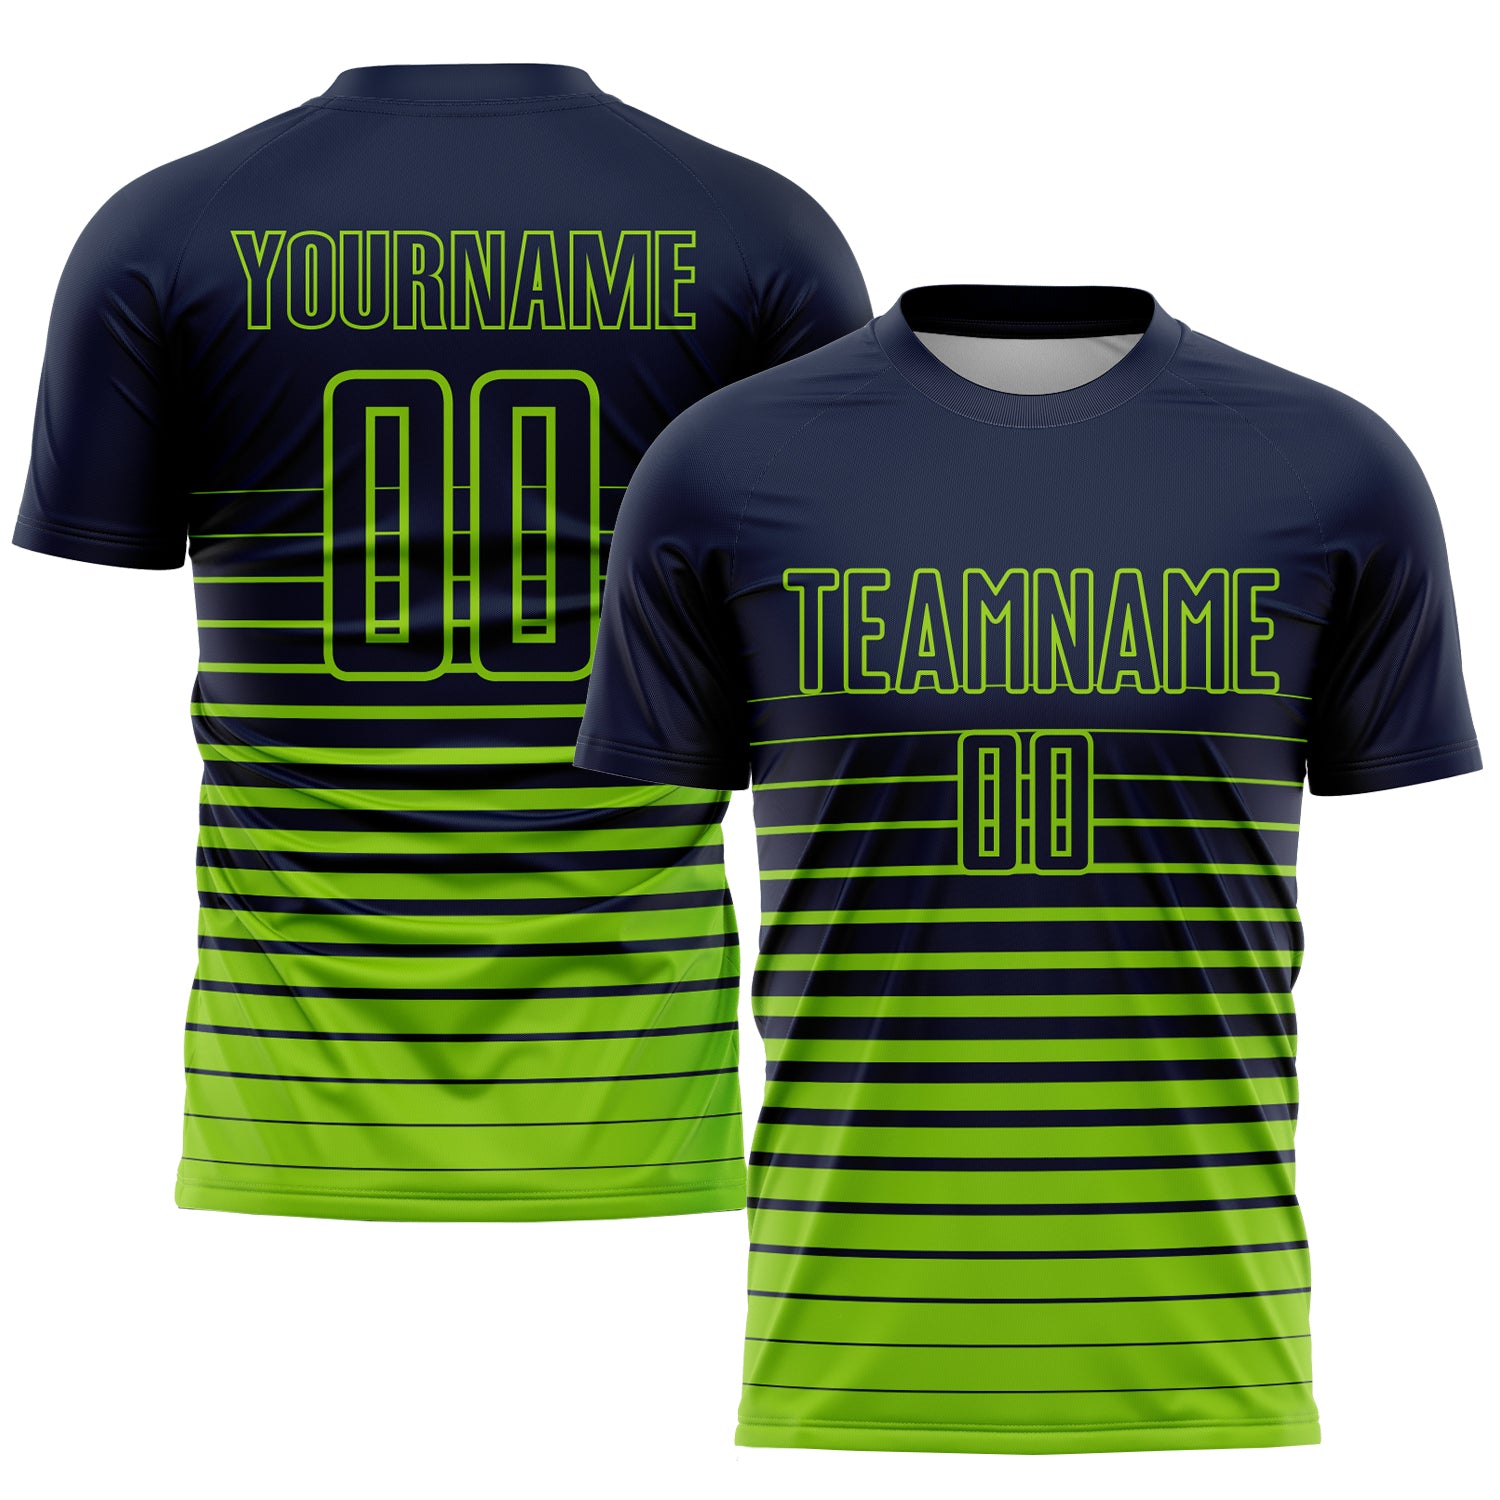 Classic 19 - Customized Men's Sublimated Soccer Jersey Design